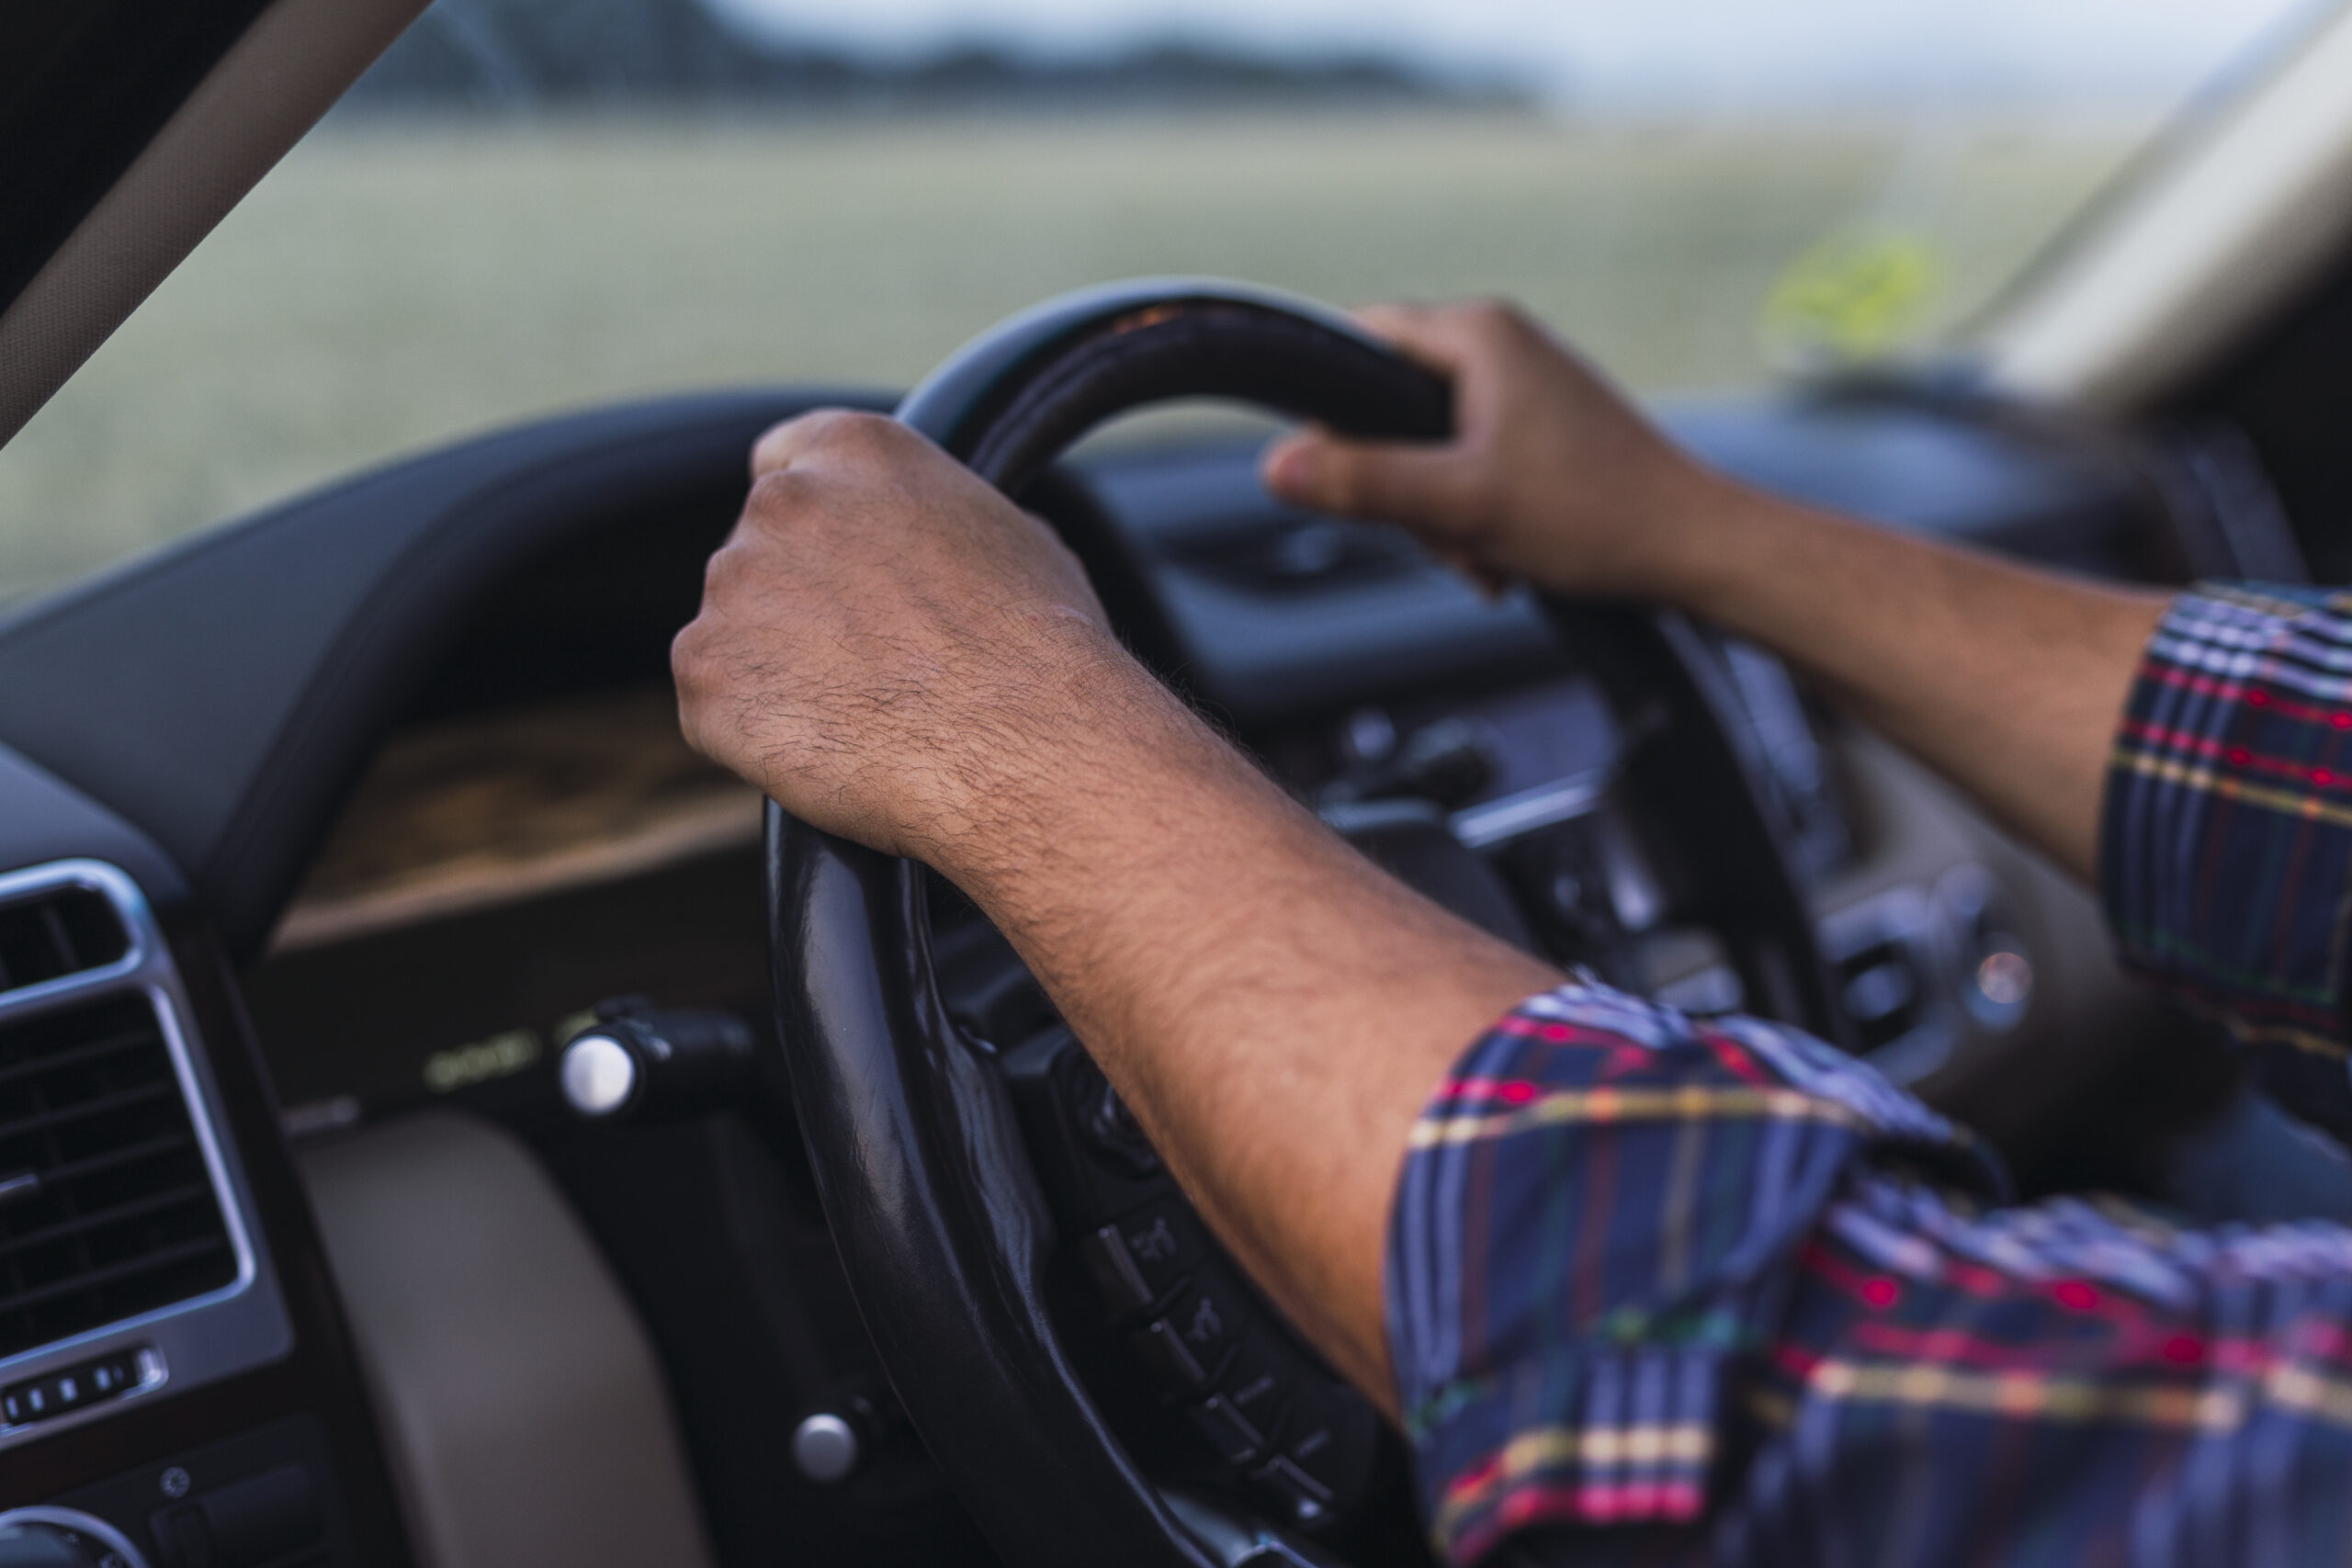 A photo of a person’s hands on a steering wheel of a car